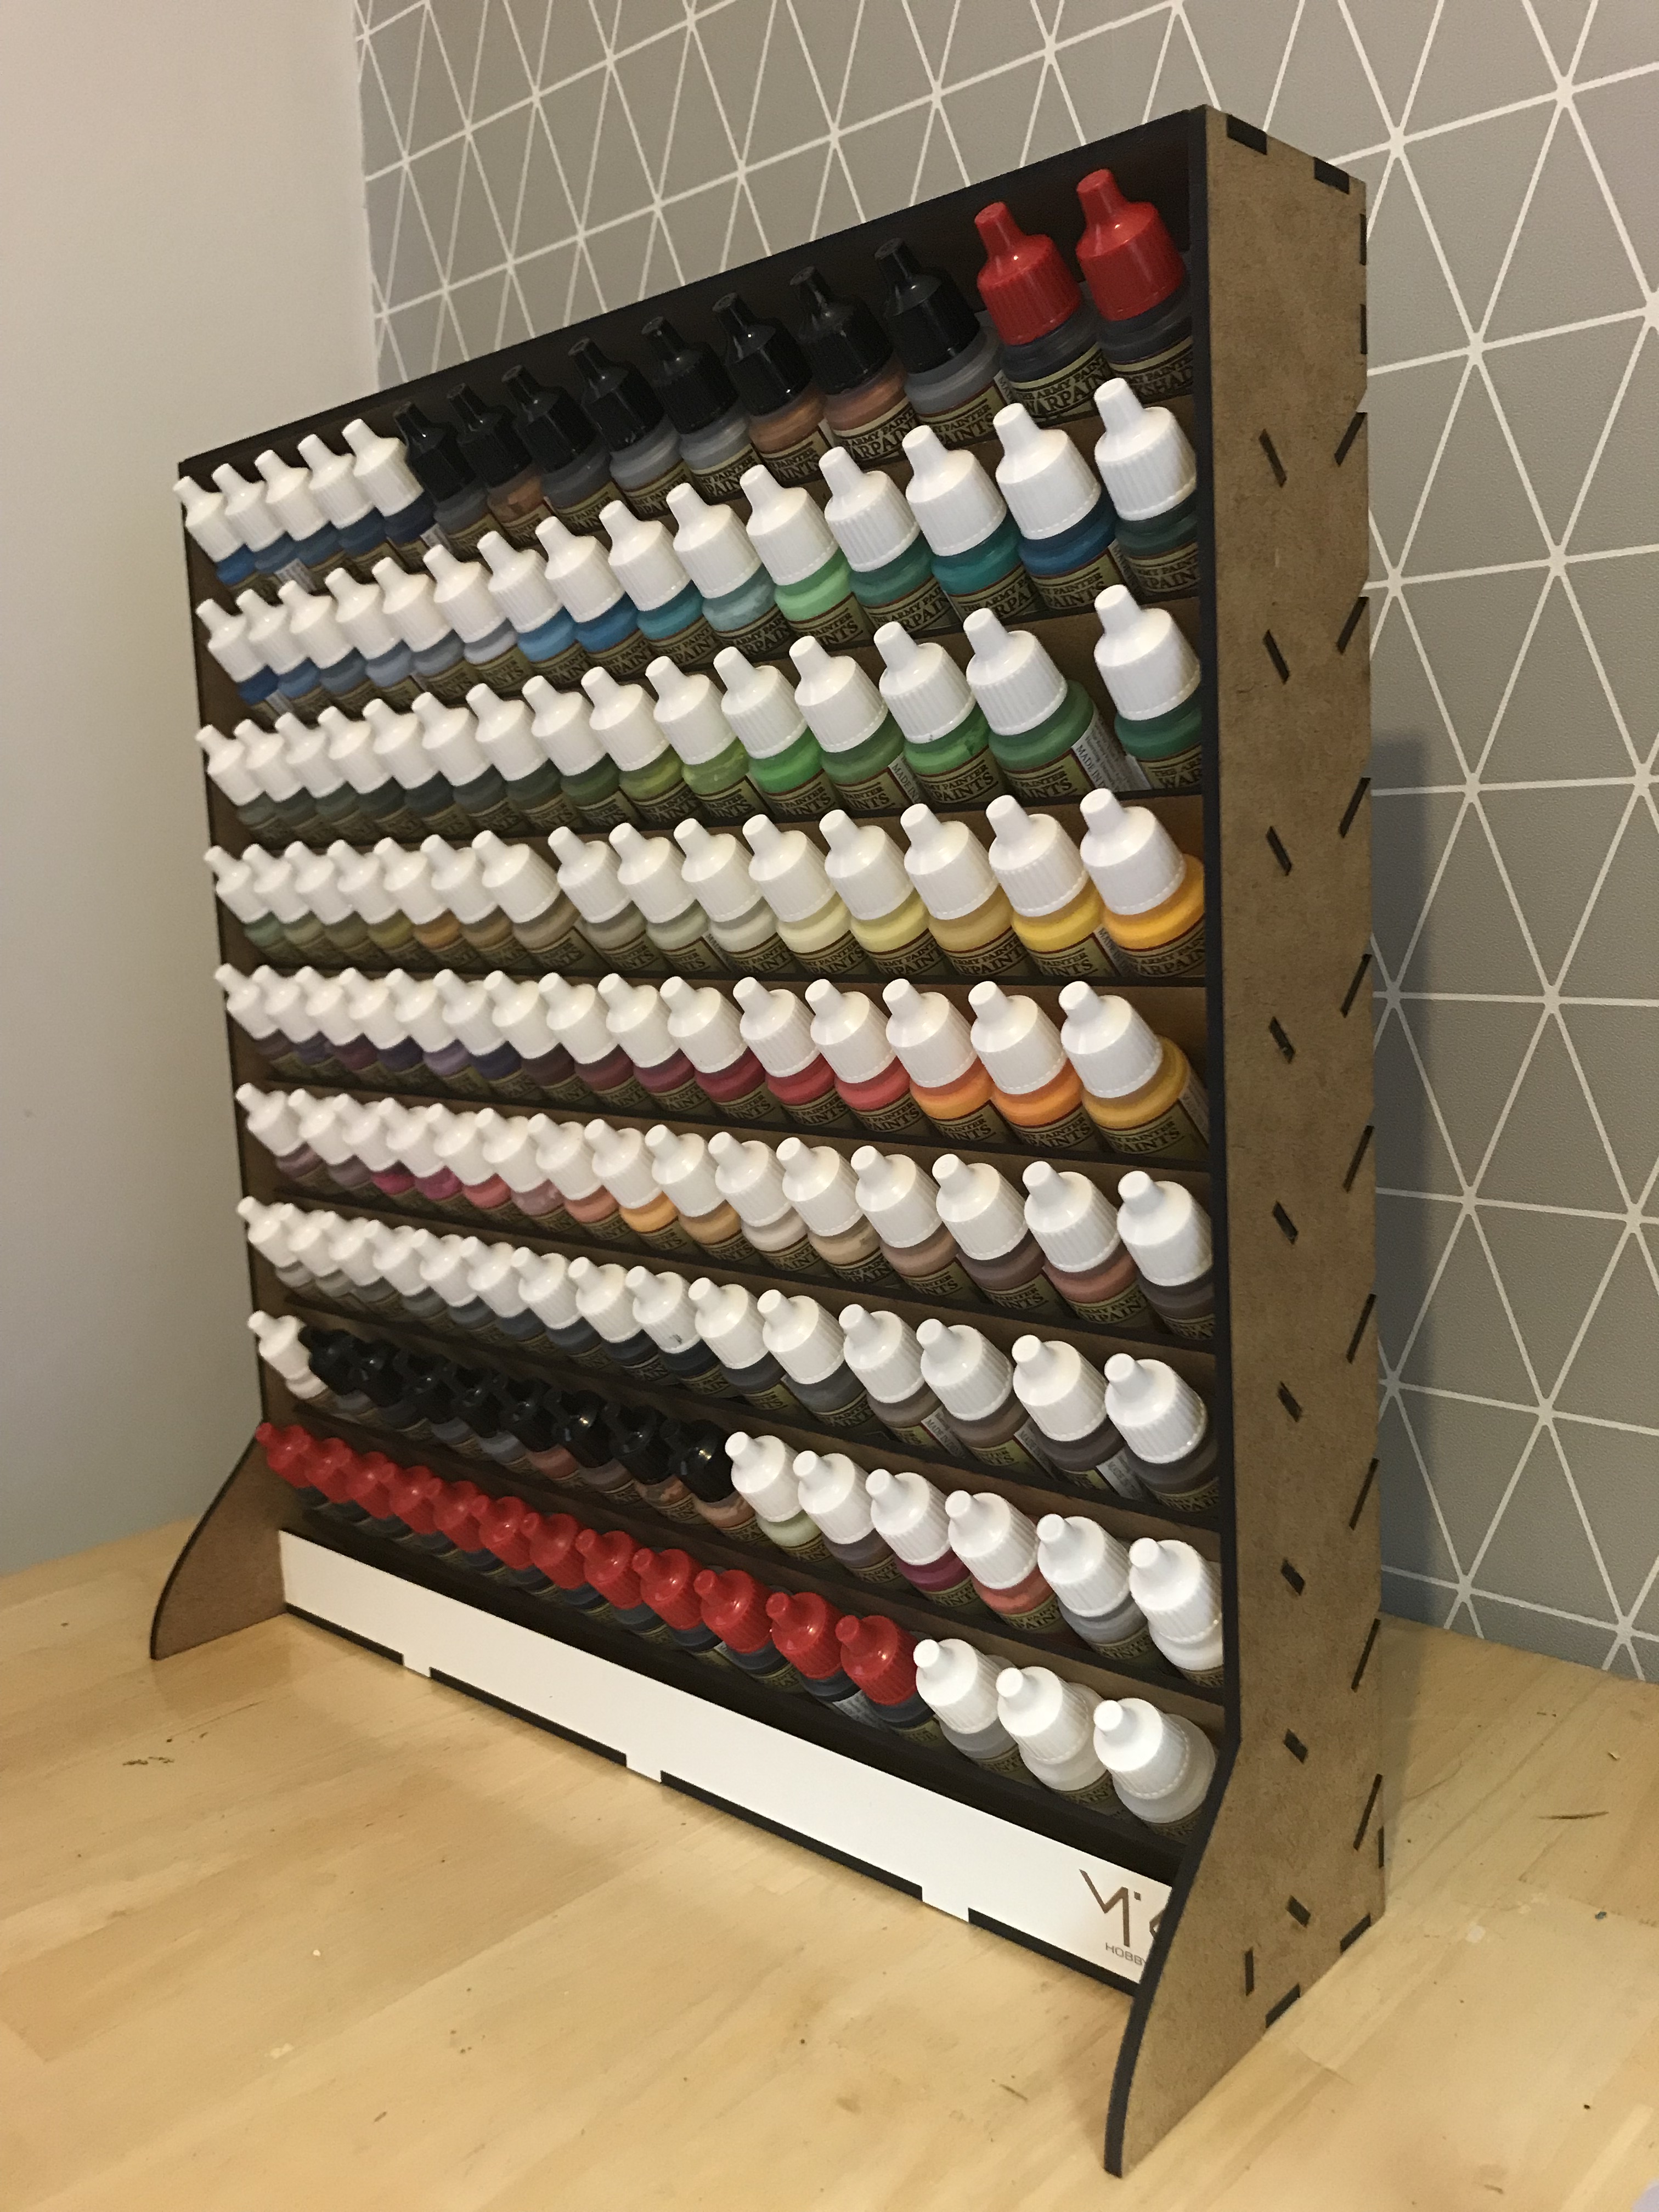 MK Hobby Paint Rack Review  Pen and Lead- Reviews, Games, and More